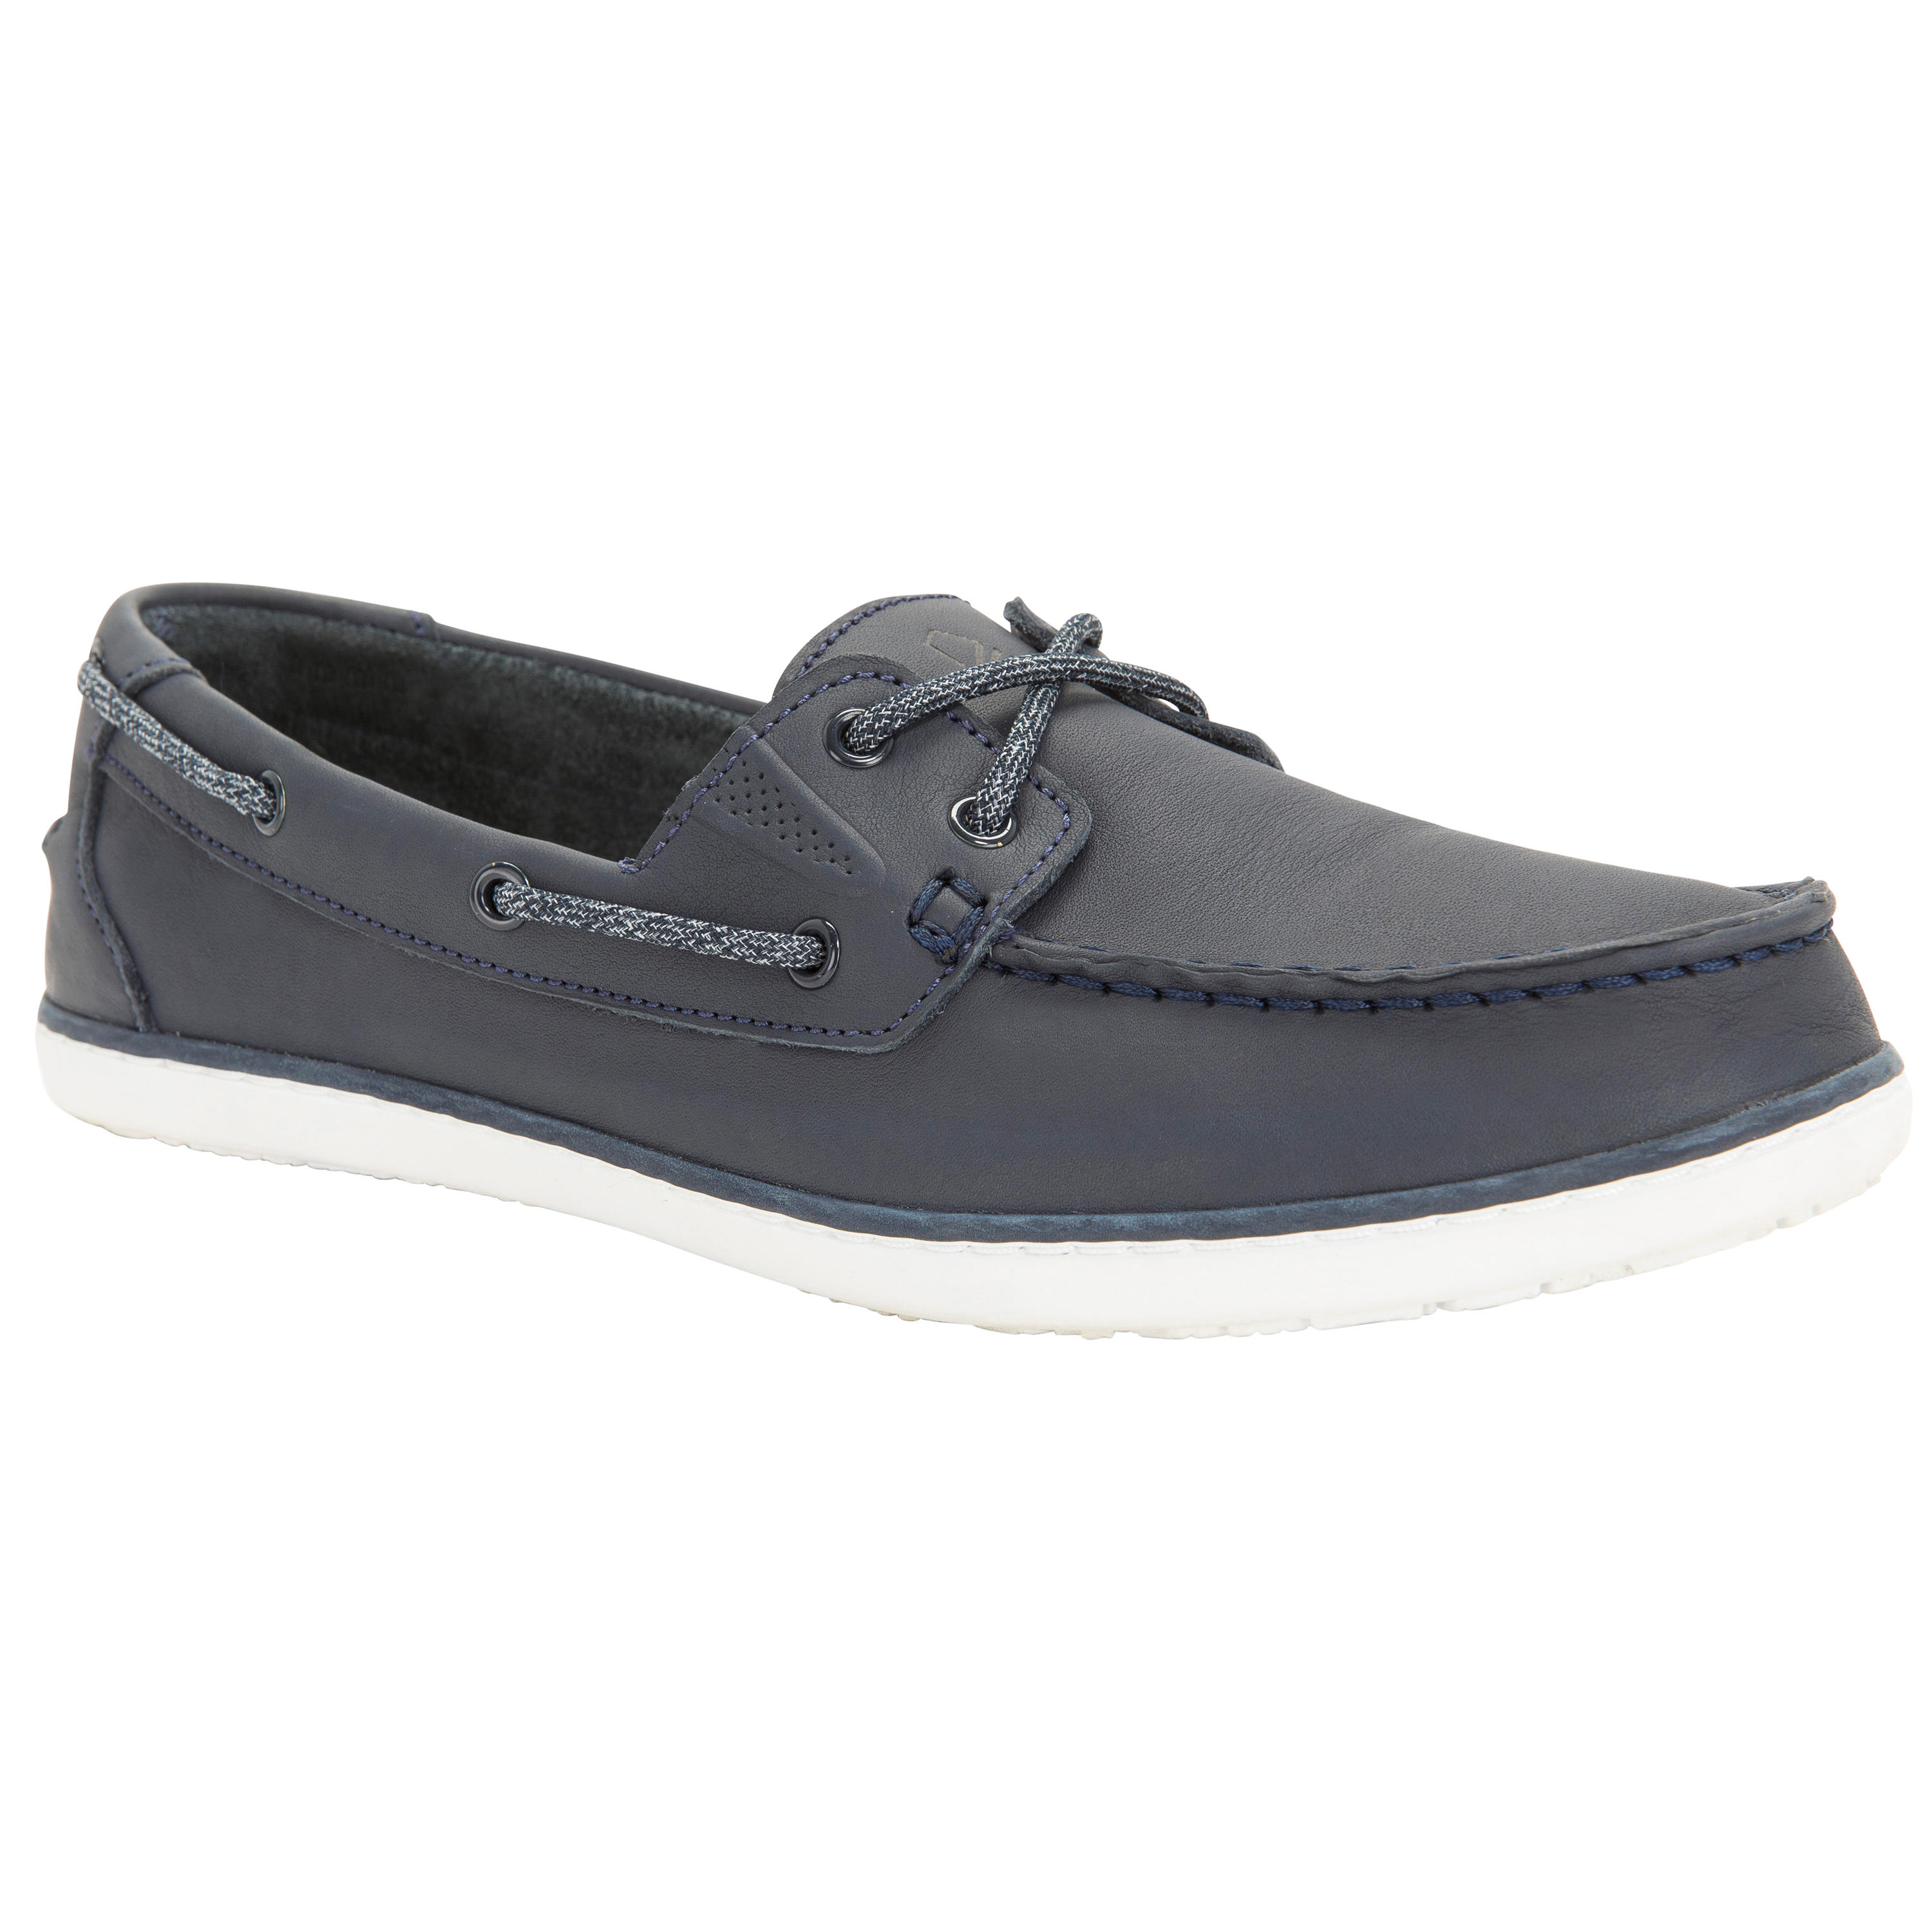 slip on boat shoes womens